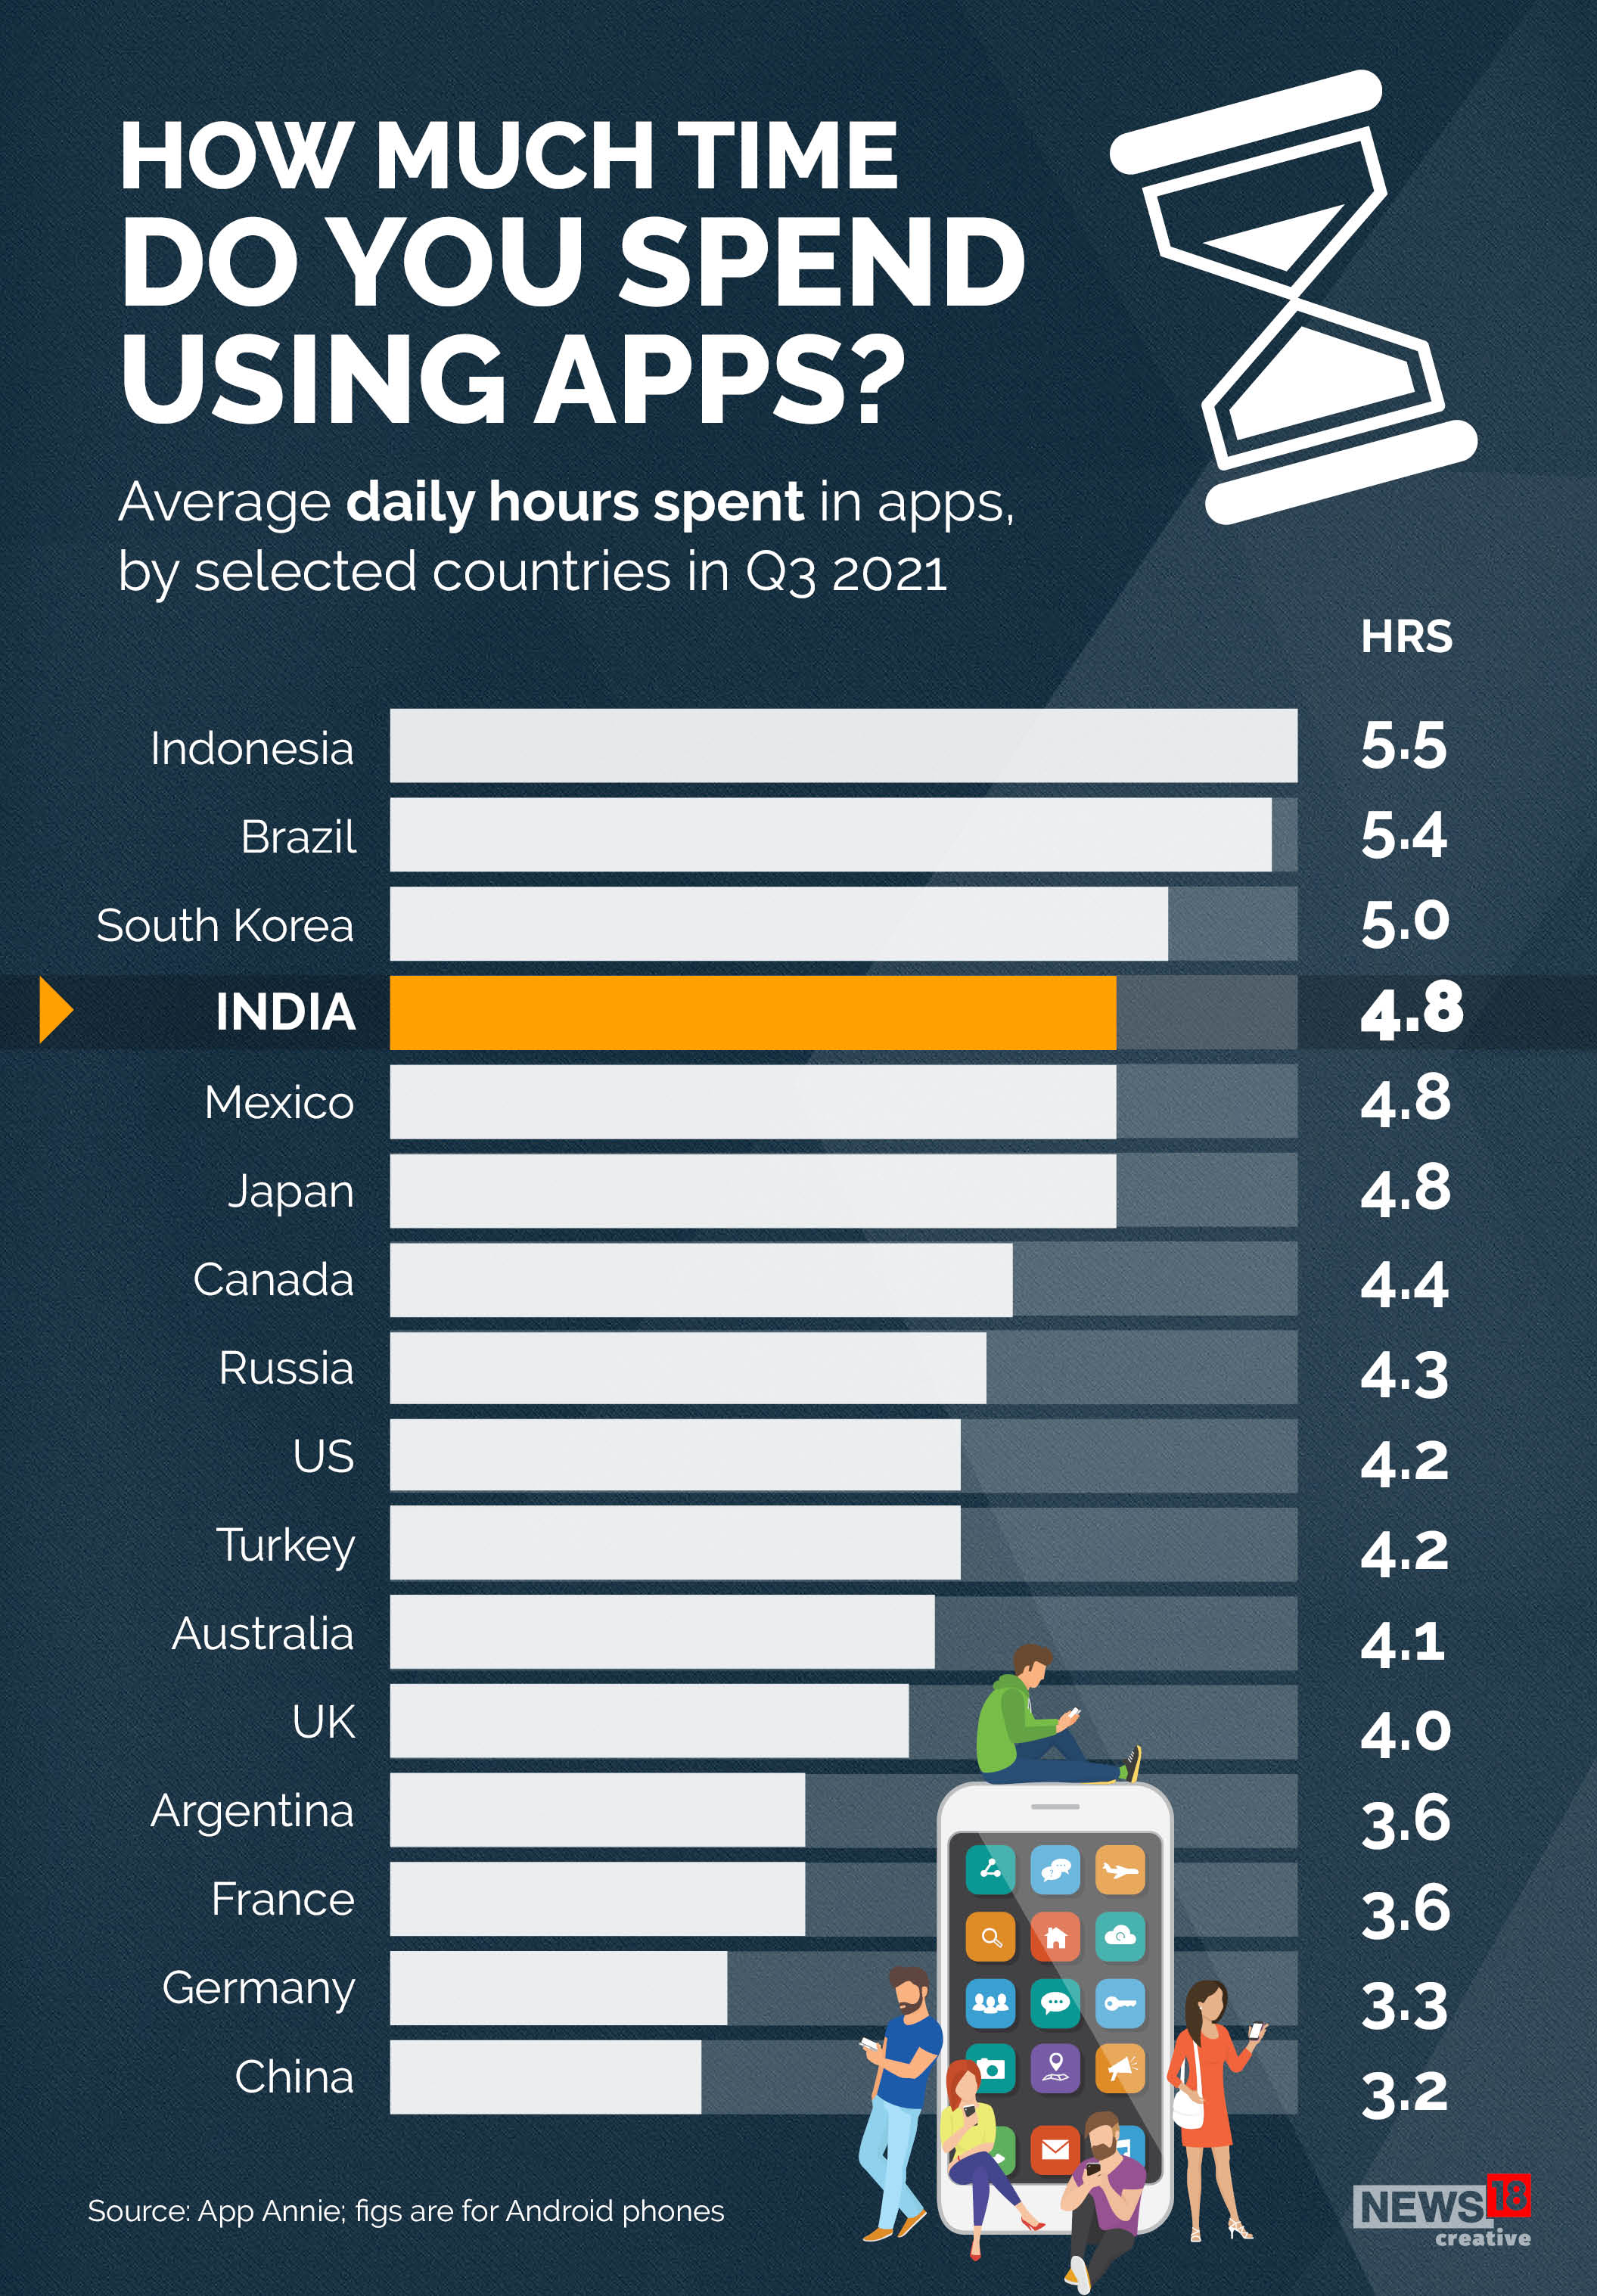 Indians spend about 5 hours on mobile apps daily